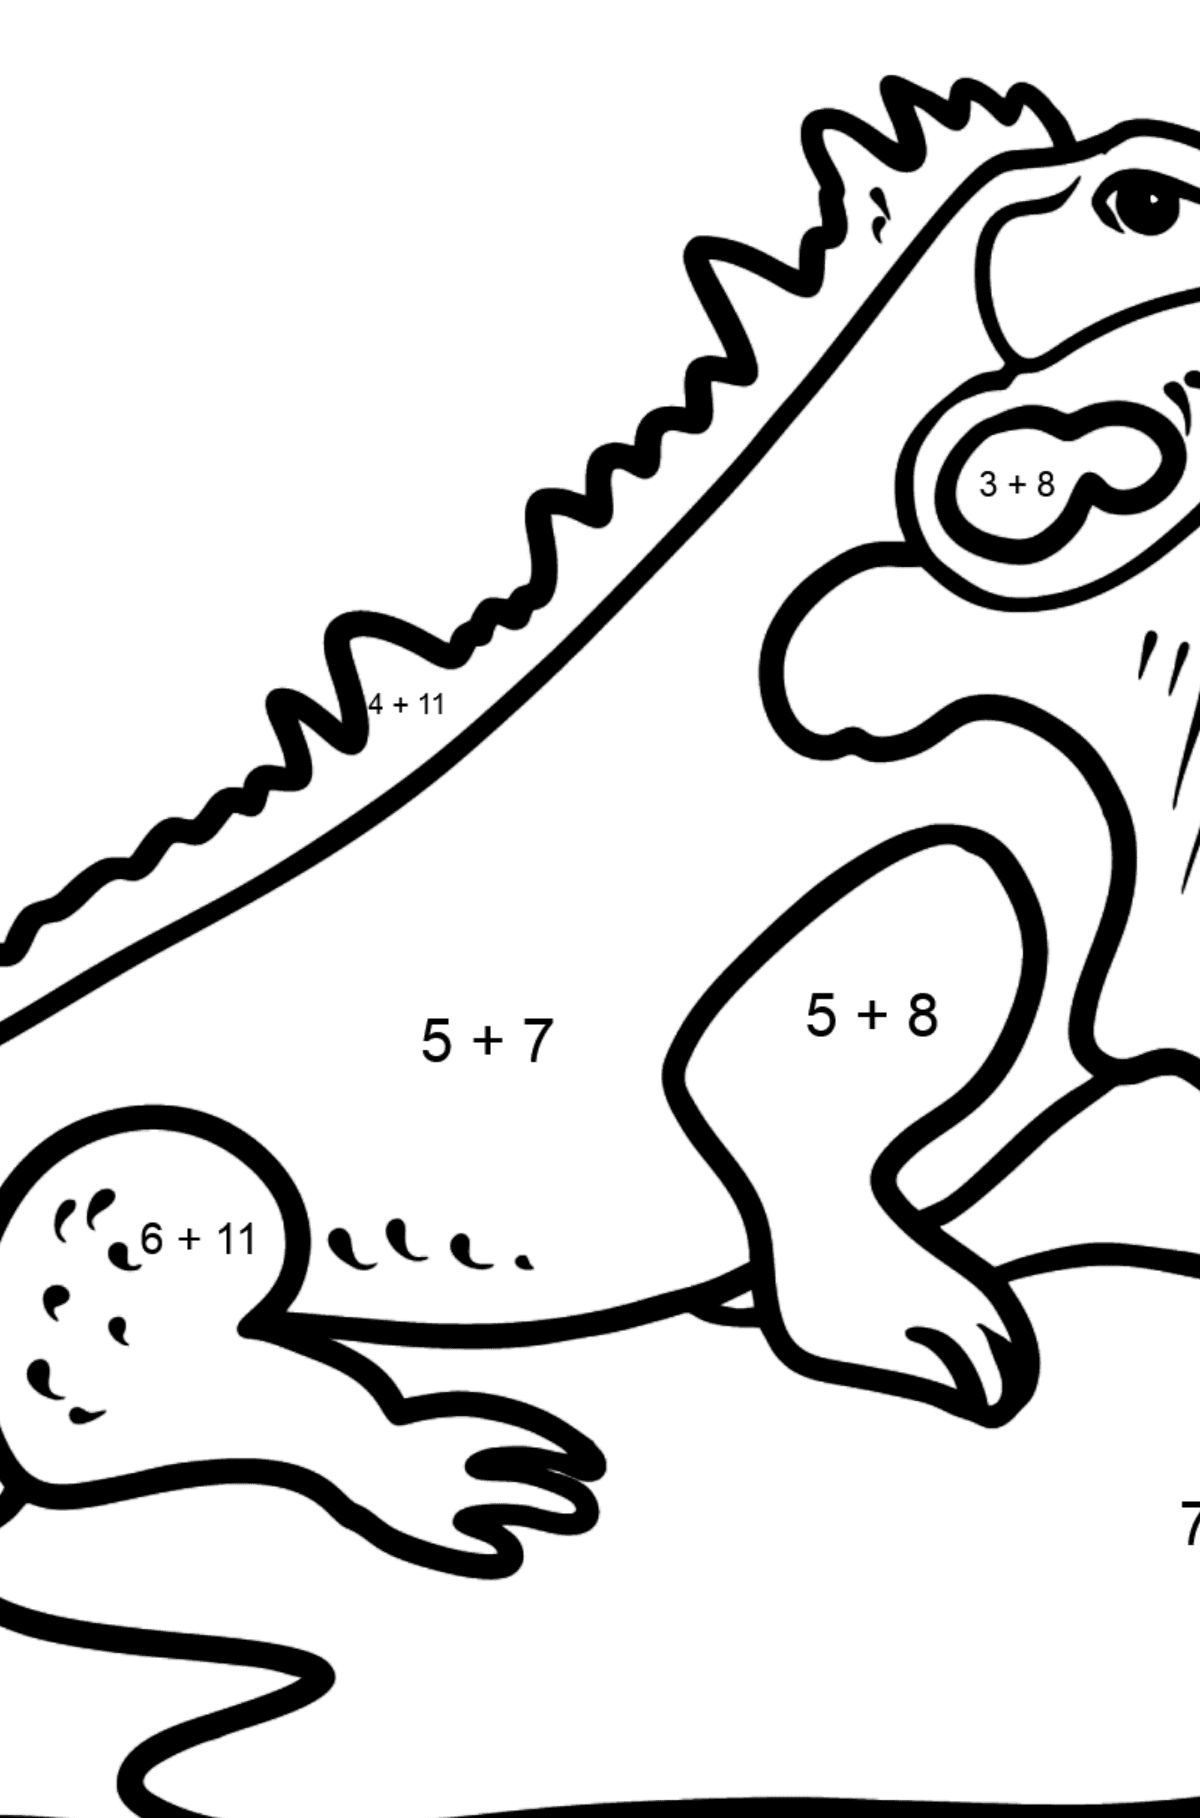 Portuguese Letter I coloring pages - IGUANA - Math Coloring - Addition for Kids